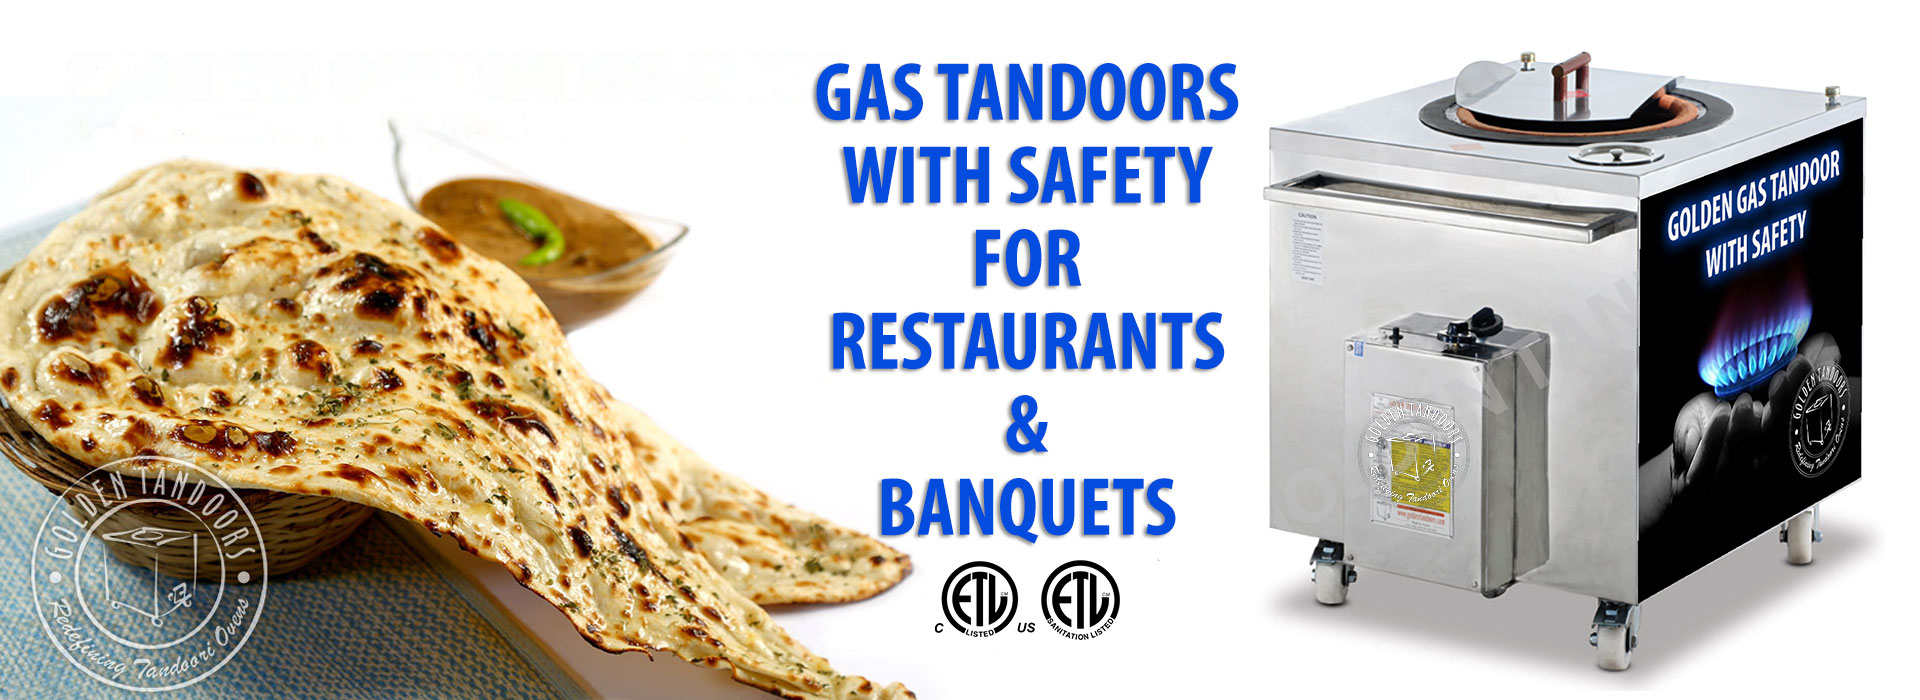 GAS TANDOORS WITH SAFETY FOR RESTAURANTS & BANQUETS